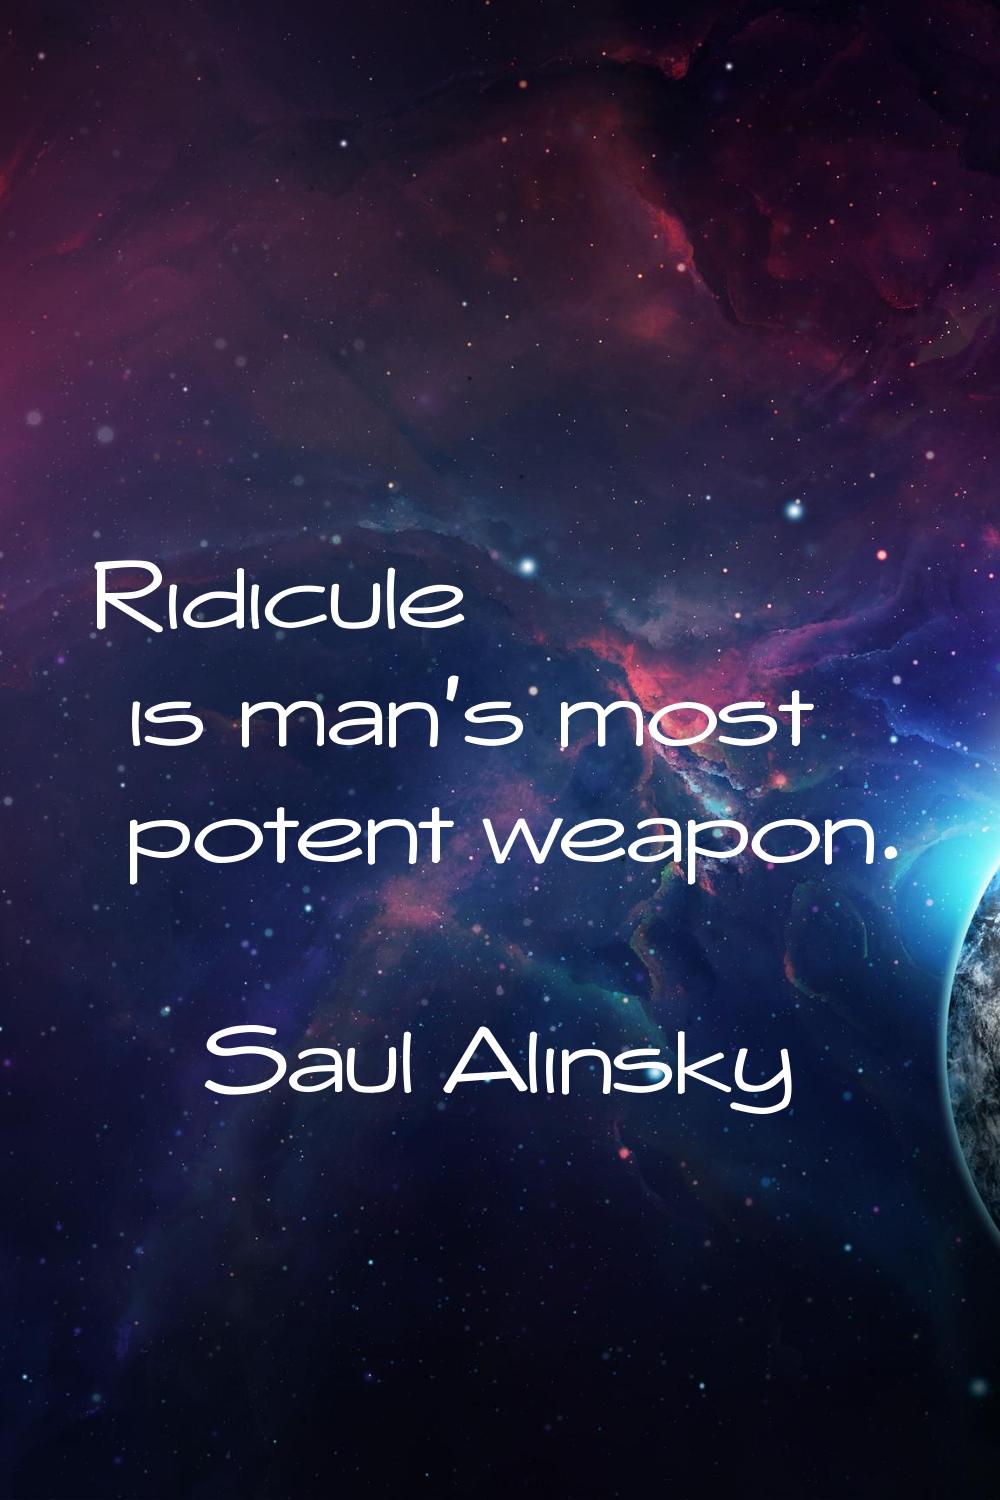 Ridicule is man's most potent weapon.